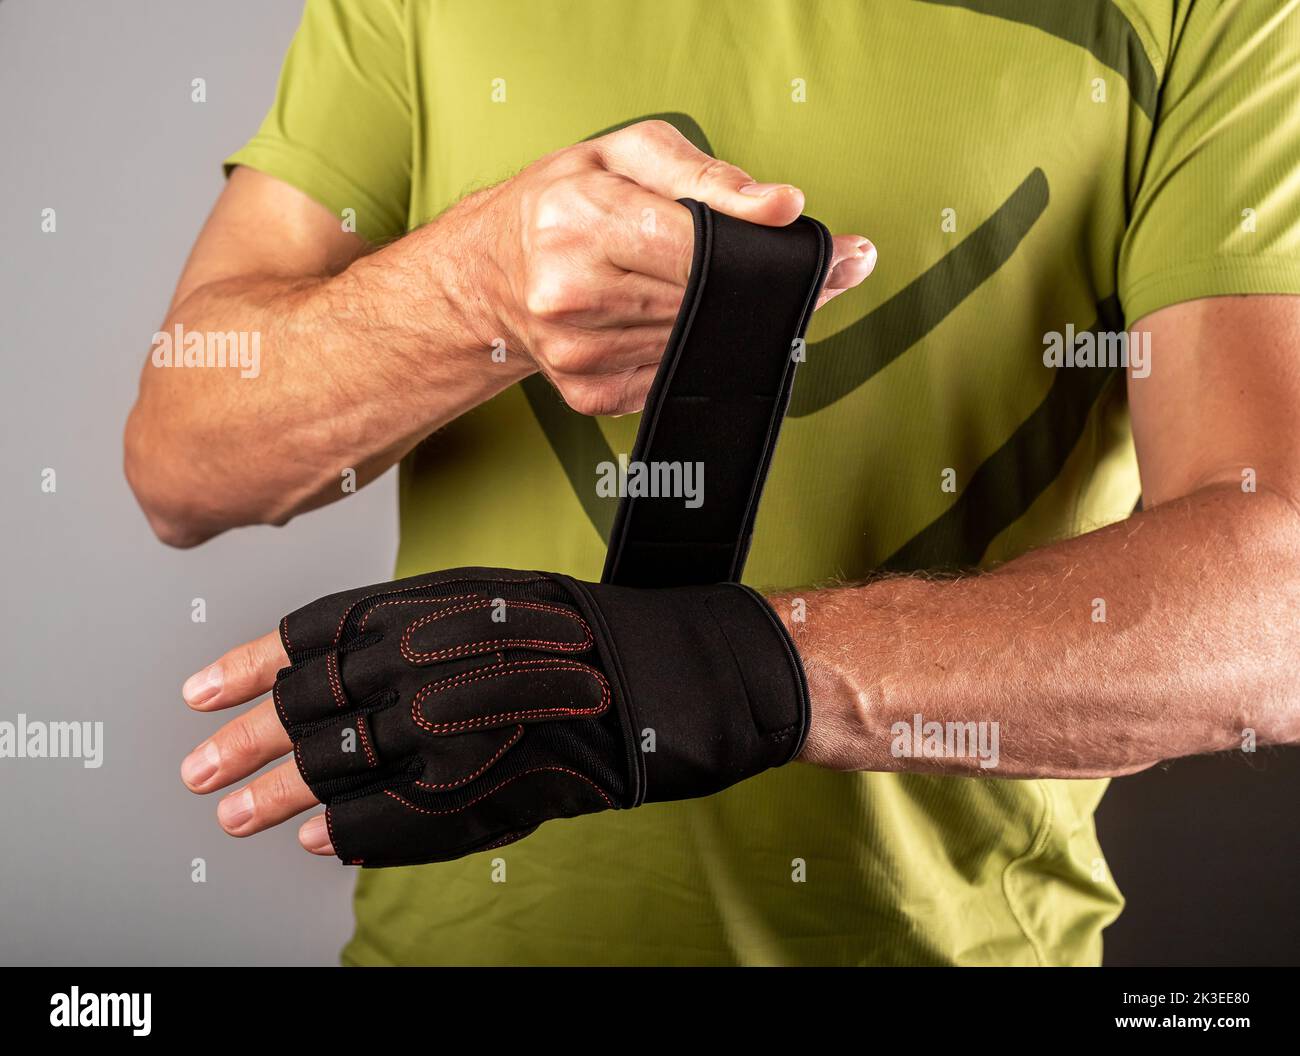 Wrapping, putting on training workout gloves on hands for wrist protection. photo Stock Photo